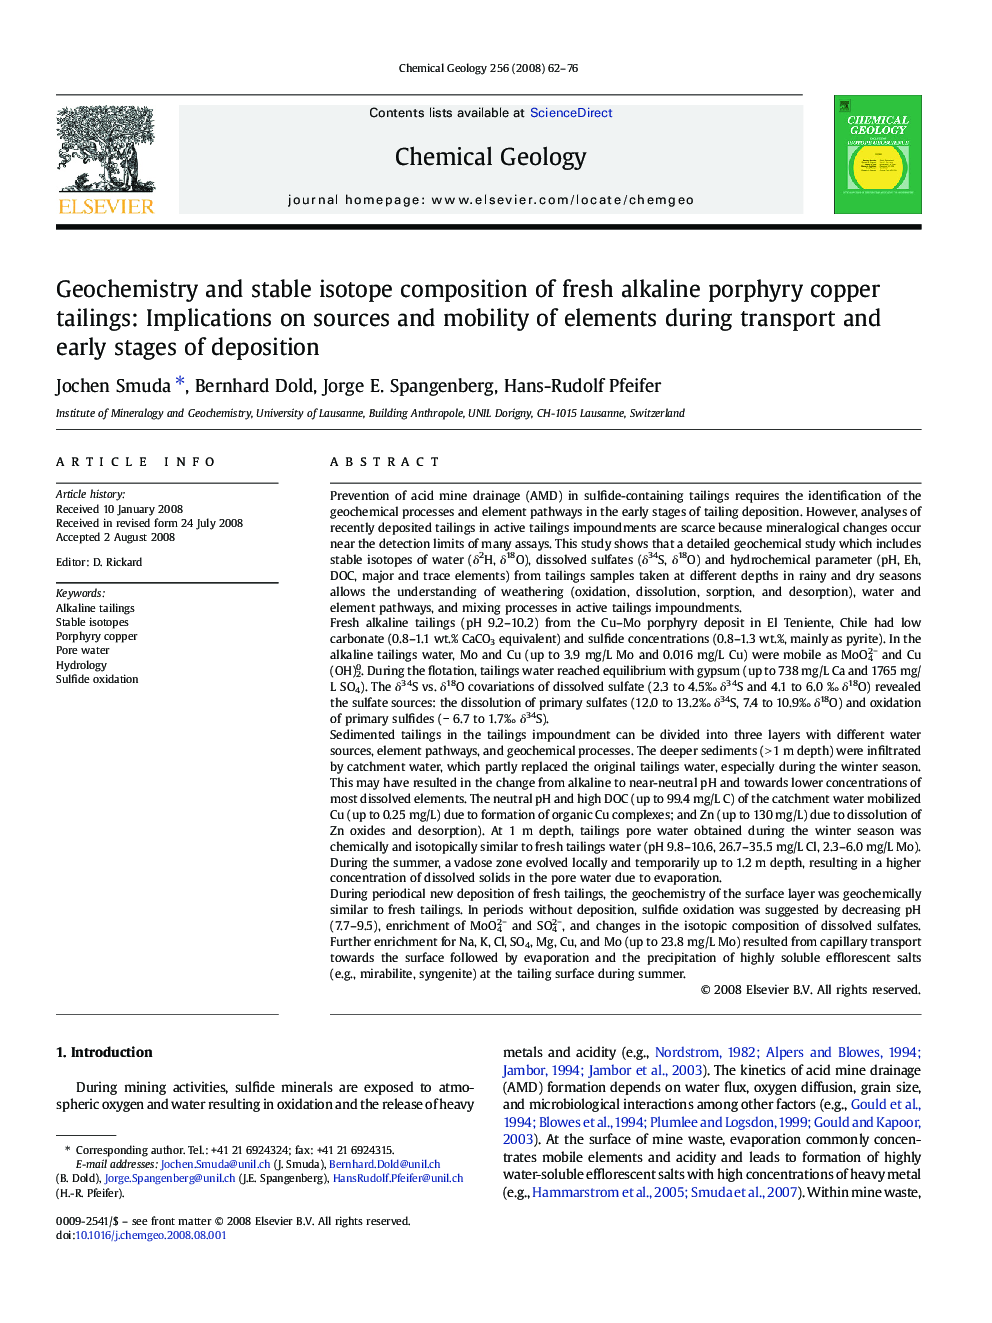 Geochemistry and stable isotope composition of fresh alkaline porphyry copper tailings: Implications on sources and mobility of elements during transport and early stages of deposition